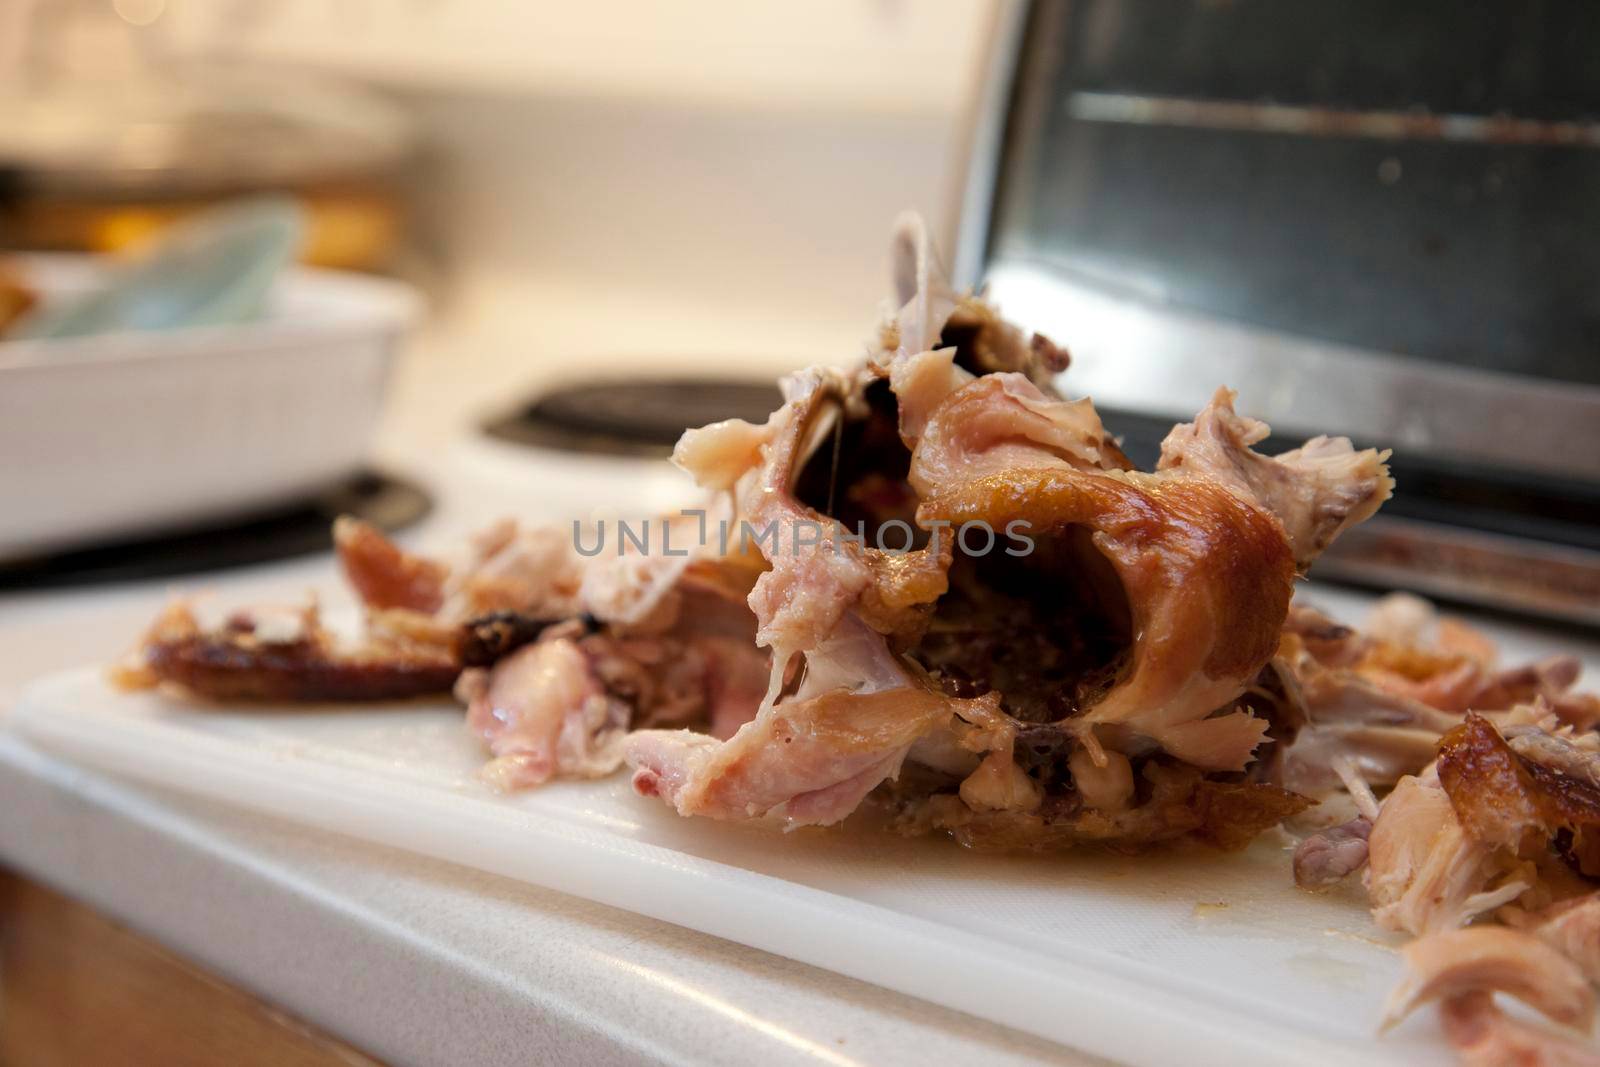 Delicious looking chicken meat on the body of a cooked or barbequed chicken 